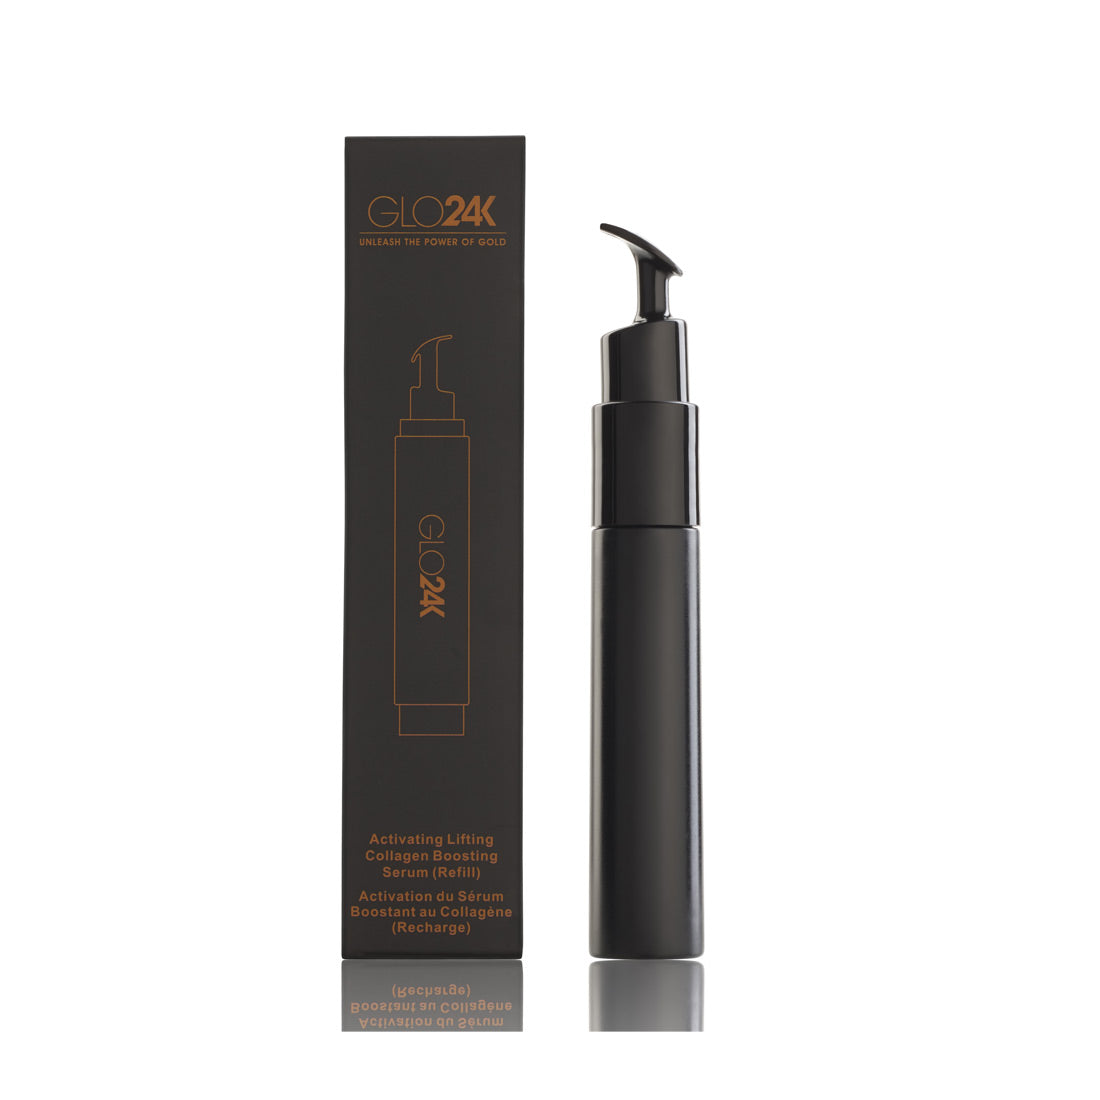 Activating Lifting Collagen Boosting Serum (Refill for the Rejuvenator)